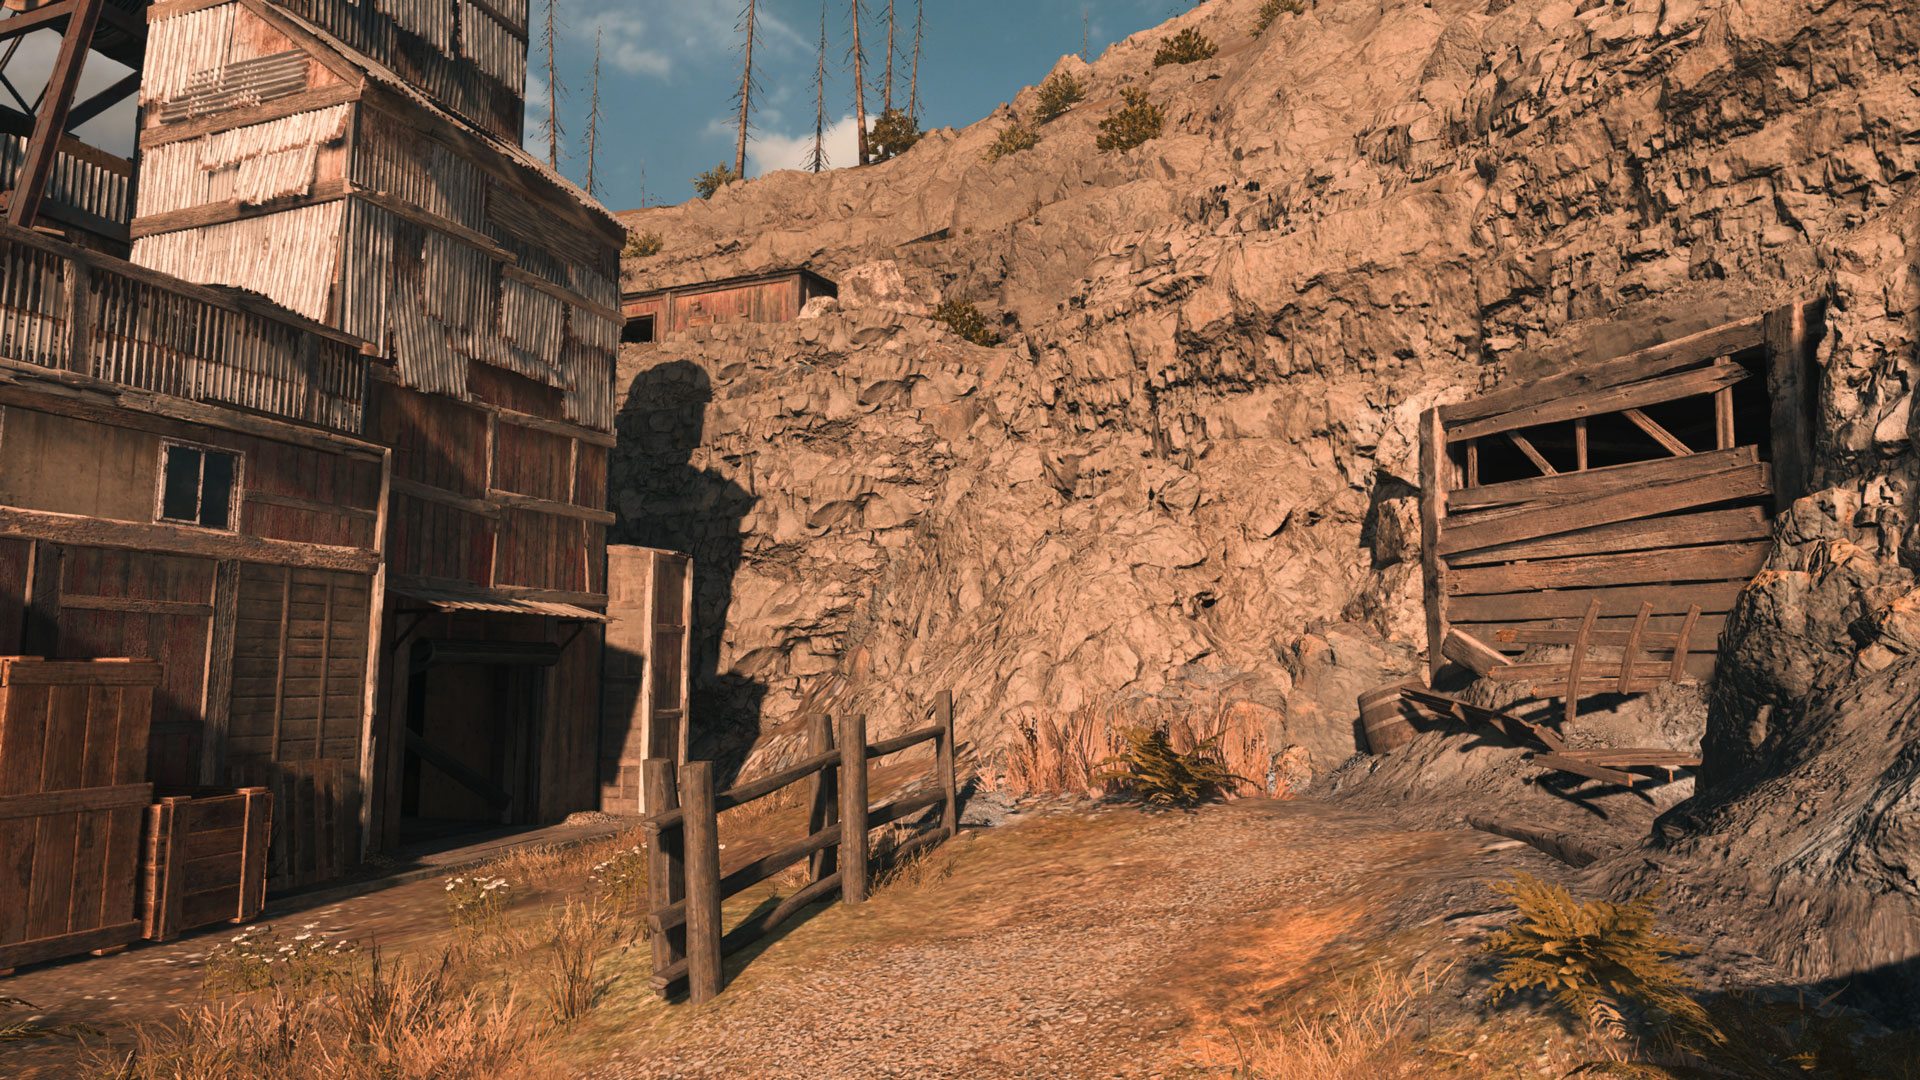 A boarded up mine entrance at the Old Mine in Warzone